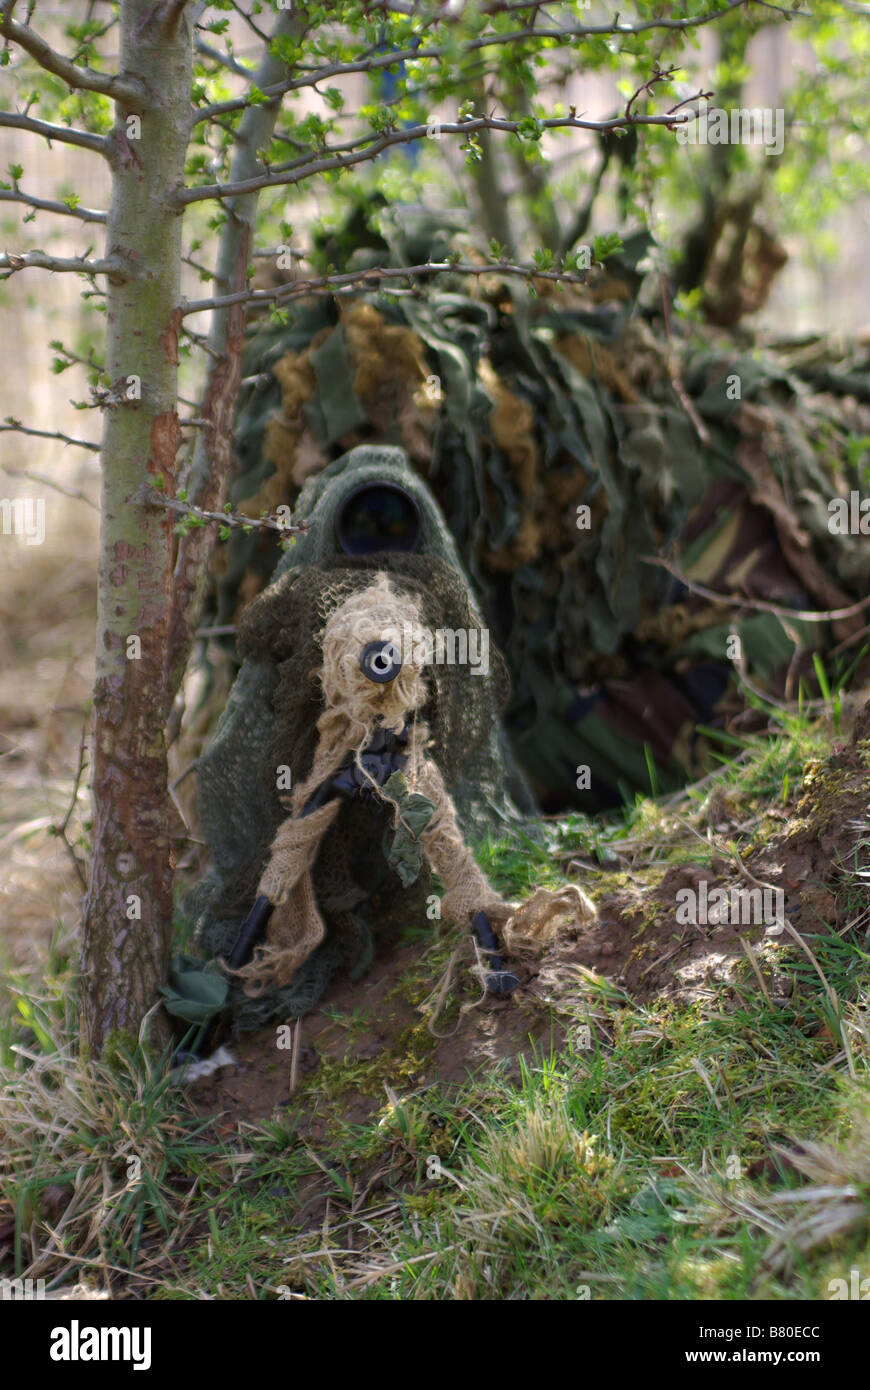 In Sniper Ghillie Suit Foto Stock